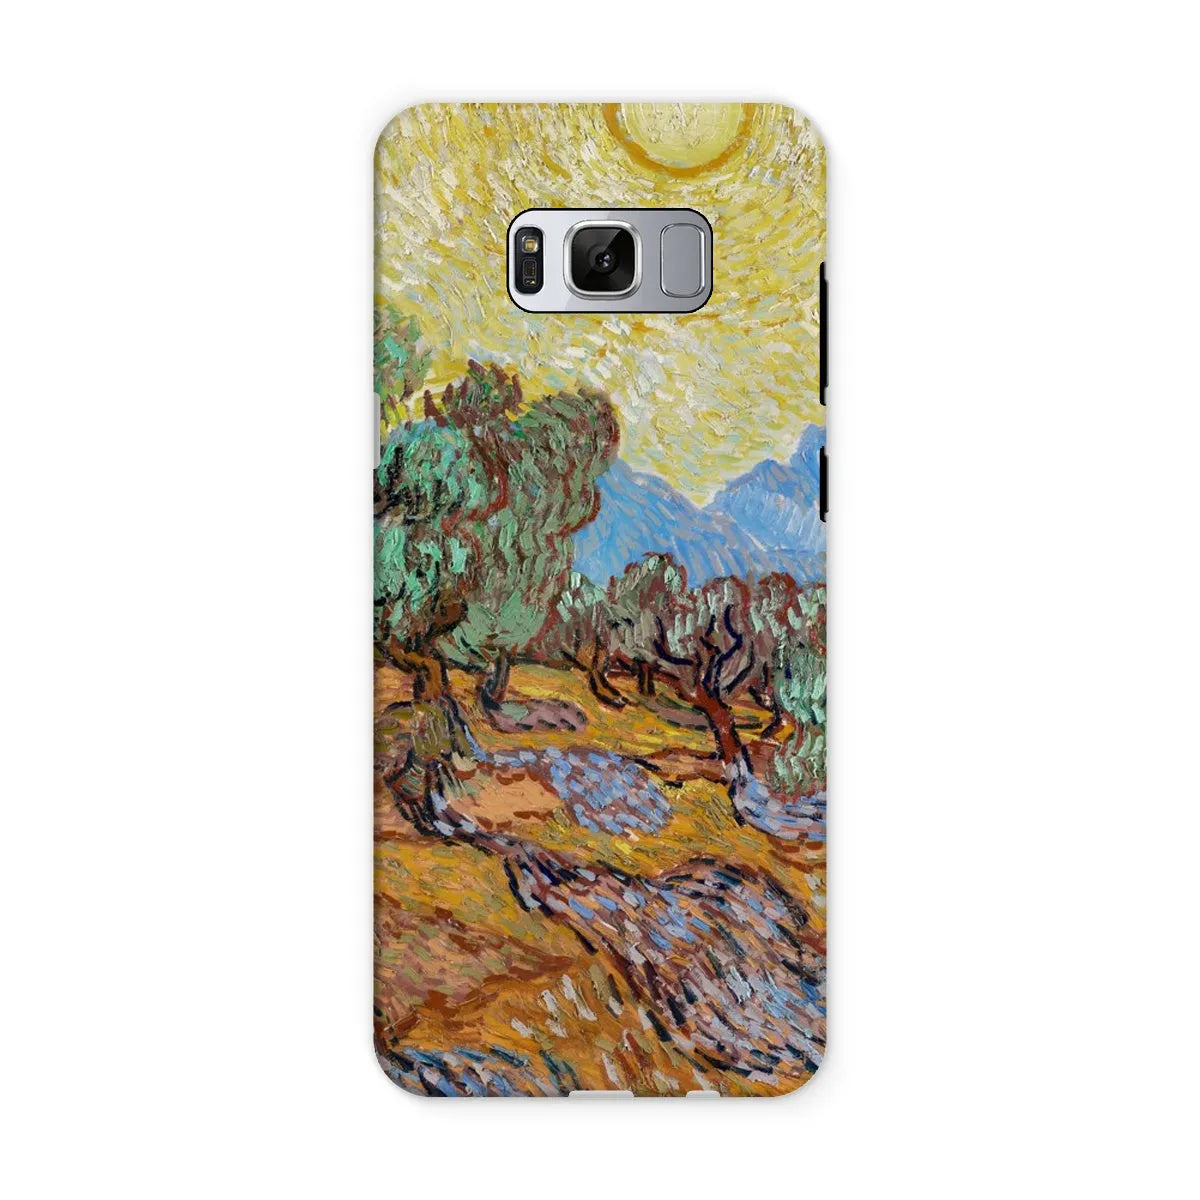 Olive Trees Too - Impressionist Phone Case - Vincent Van Gogh - Samsung Galaxy S8 / Matte - Mobile Phone Cases